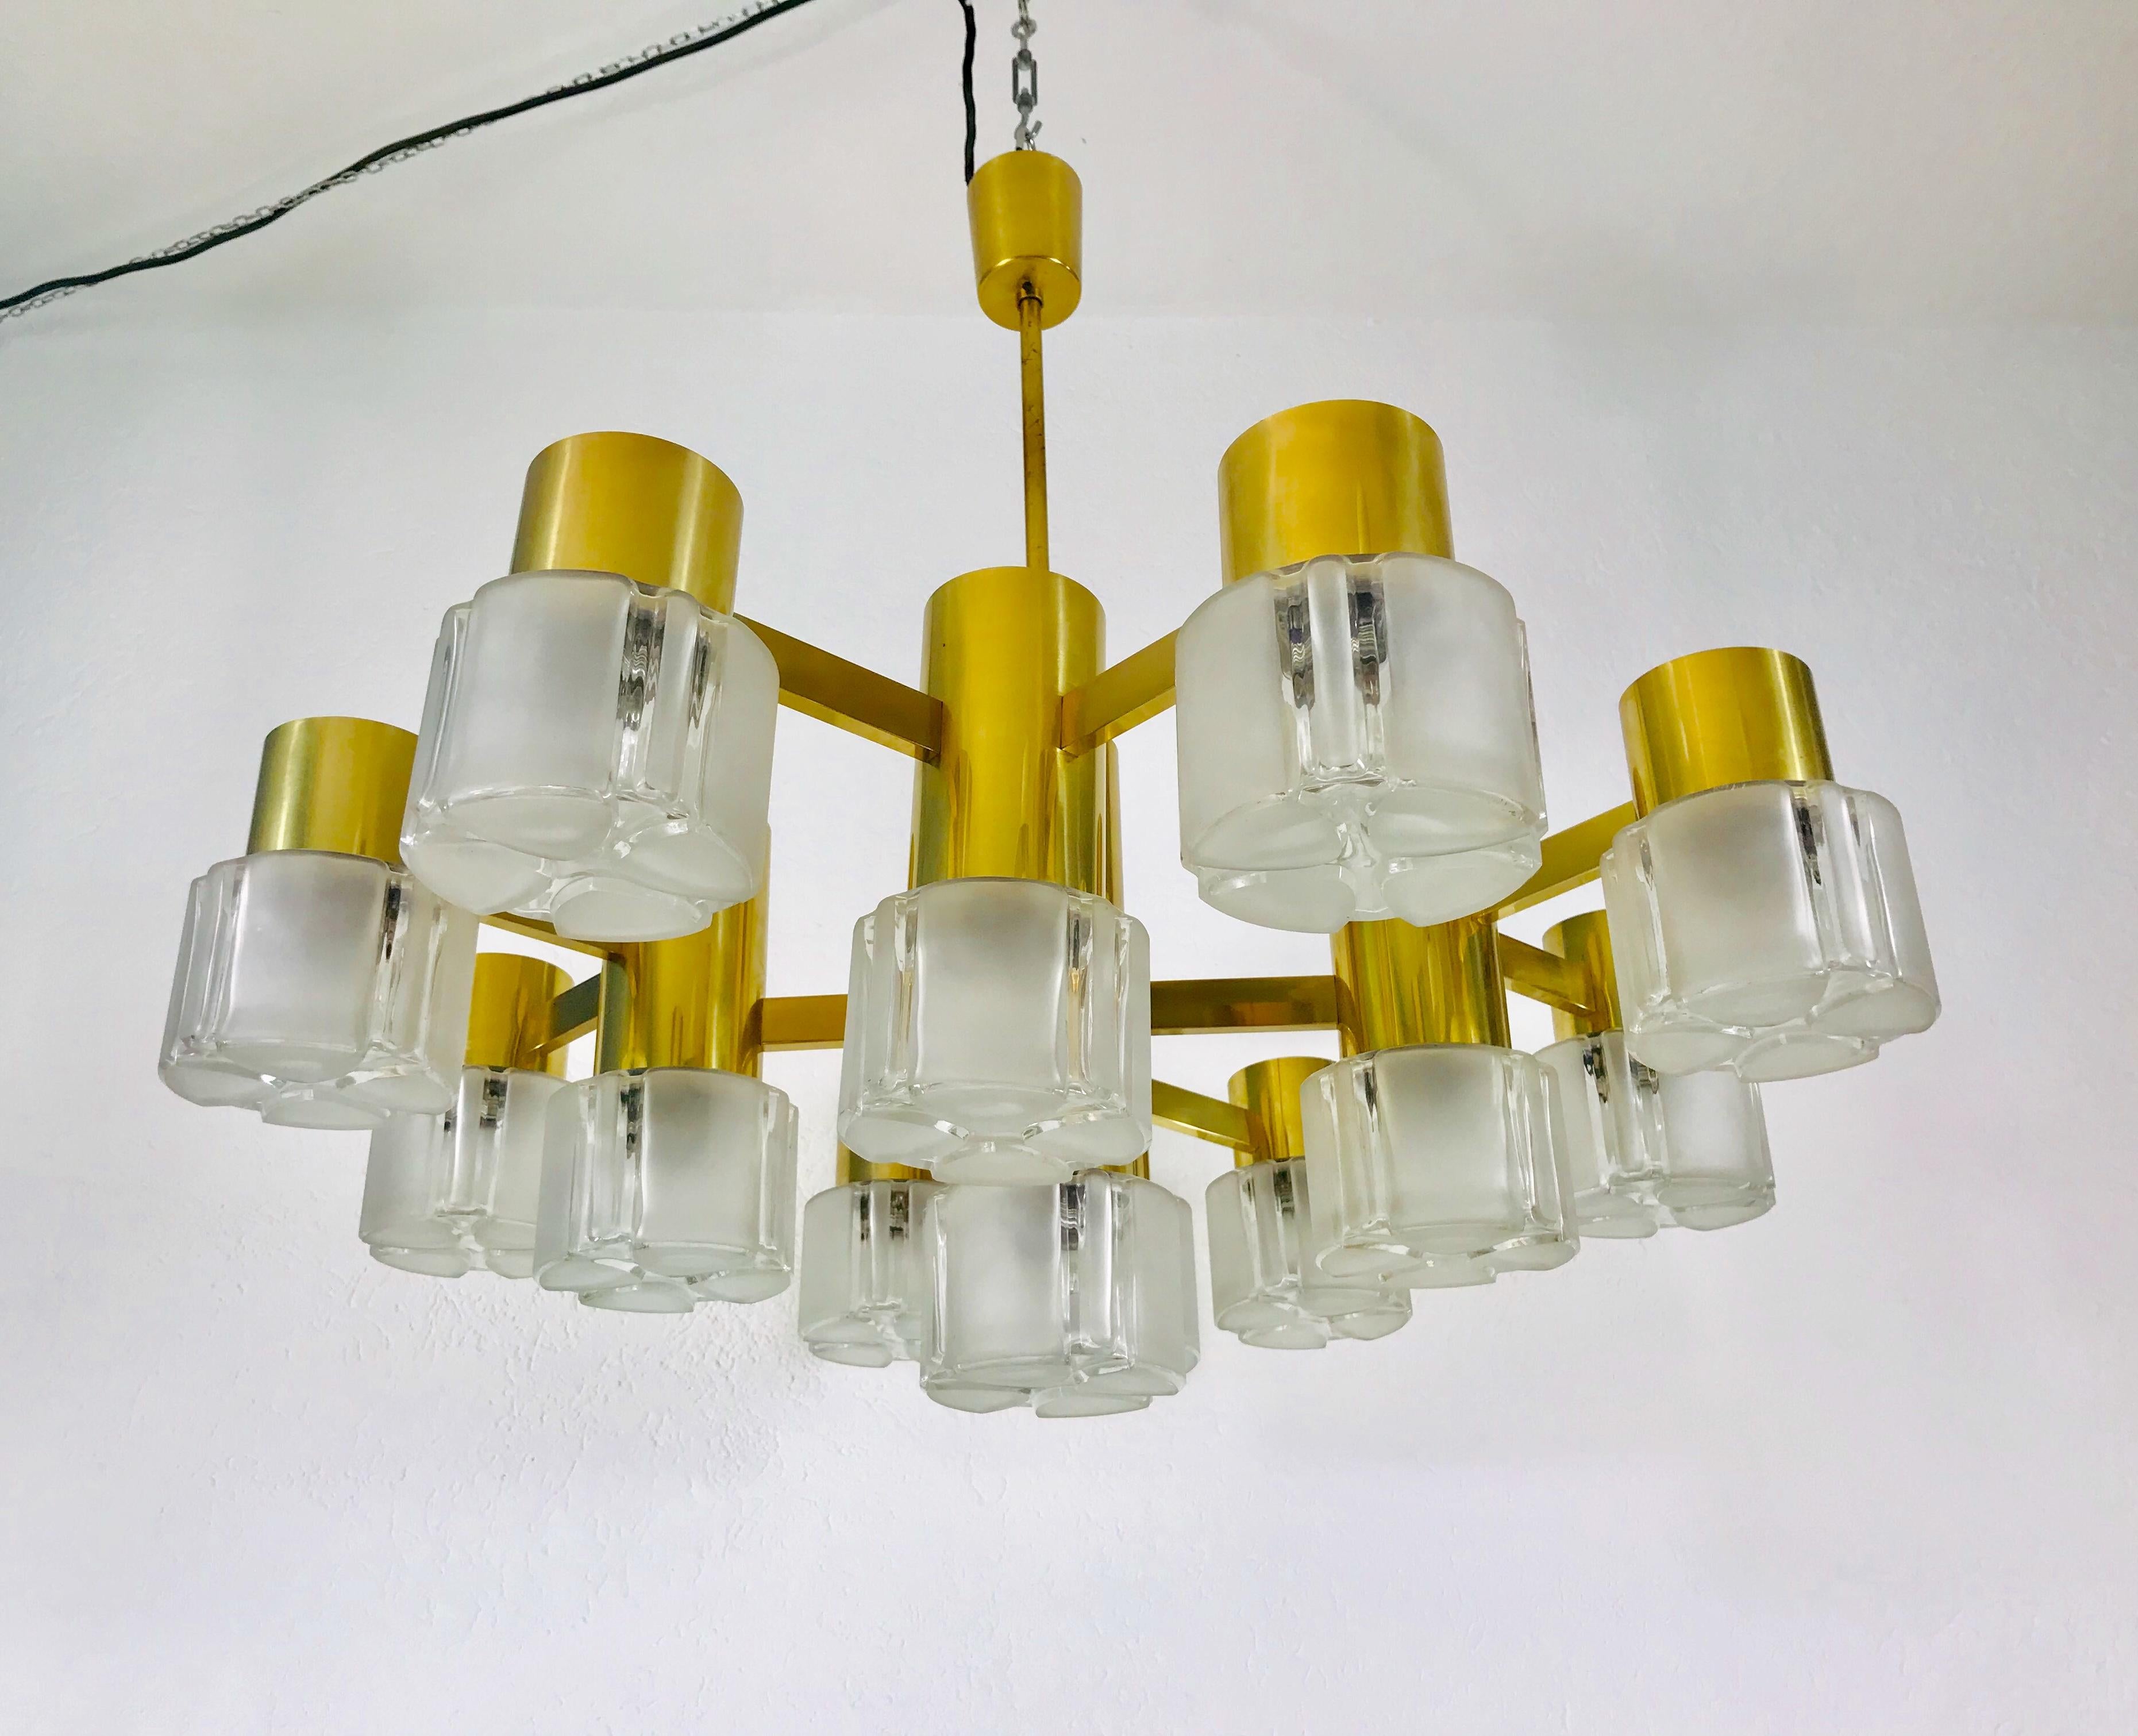 A Swedish midcentury chandelier made in the 1960s, attributed to Hans-Agne Jakobsson. It is fascinating with its monumental design and 13 glass elements. The body of the light is made of polished brass, including the arms.

Excellent vintage